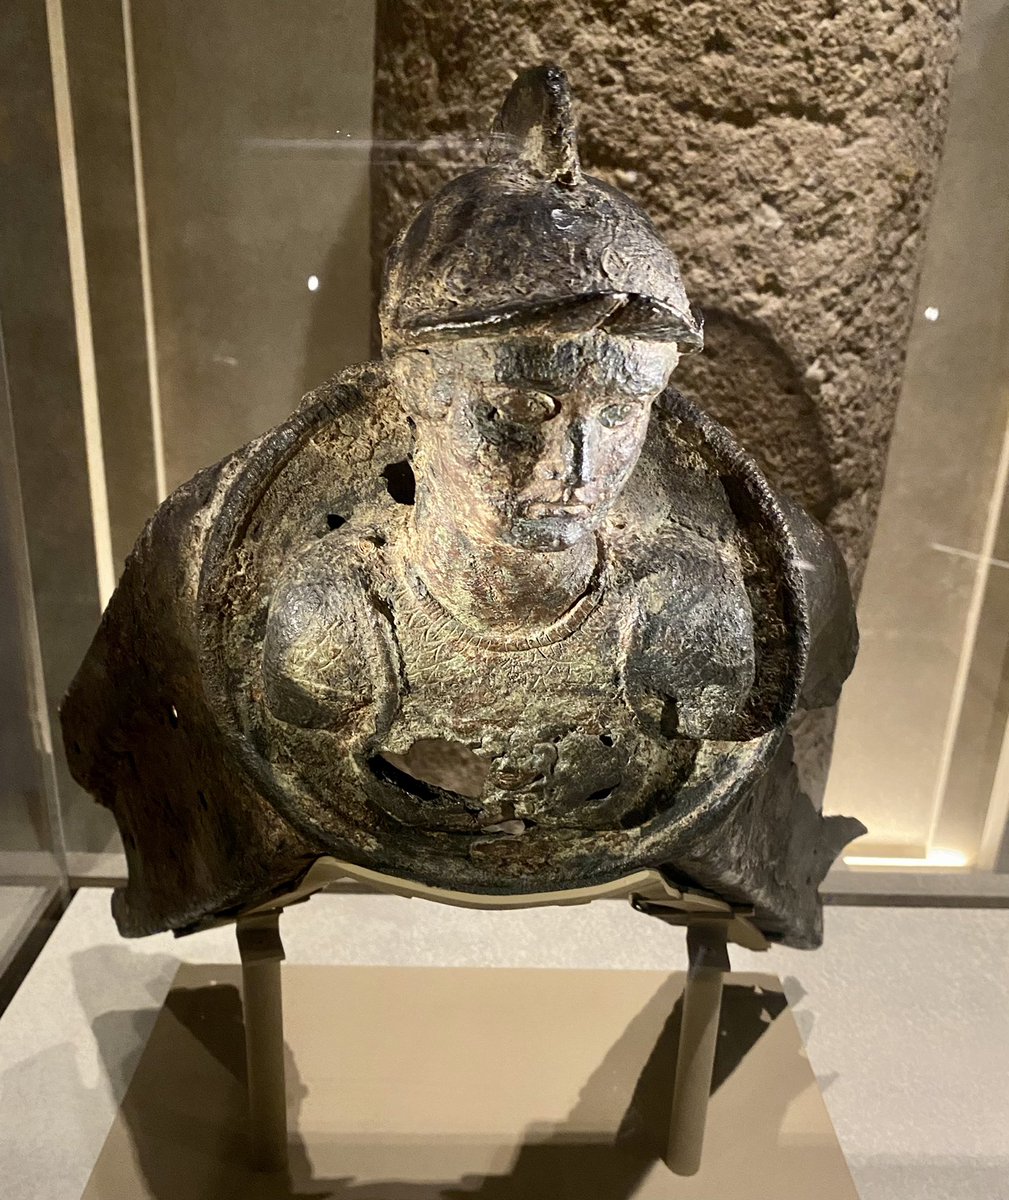 This bronze fitting featuring the head of Minerva once graced the prow of a Roman battleship, which was scrapped after the sea battle of Actium in 31 BC. It certainly looks as though it’s seen a lot! #FindsFriday #archaeology